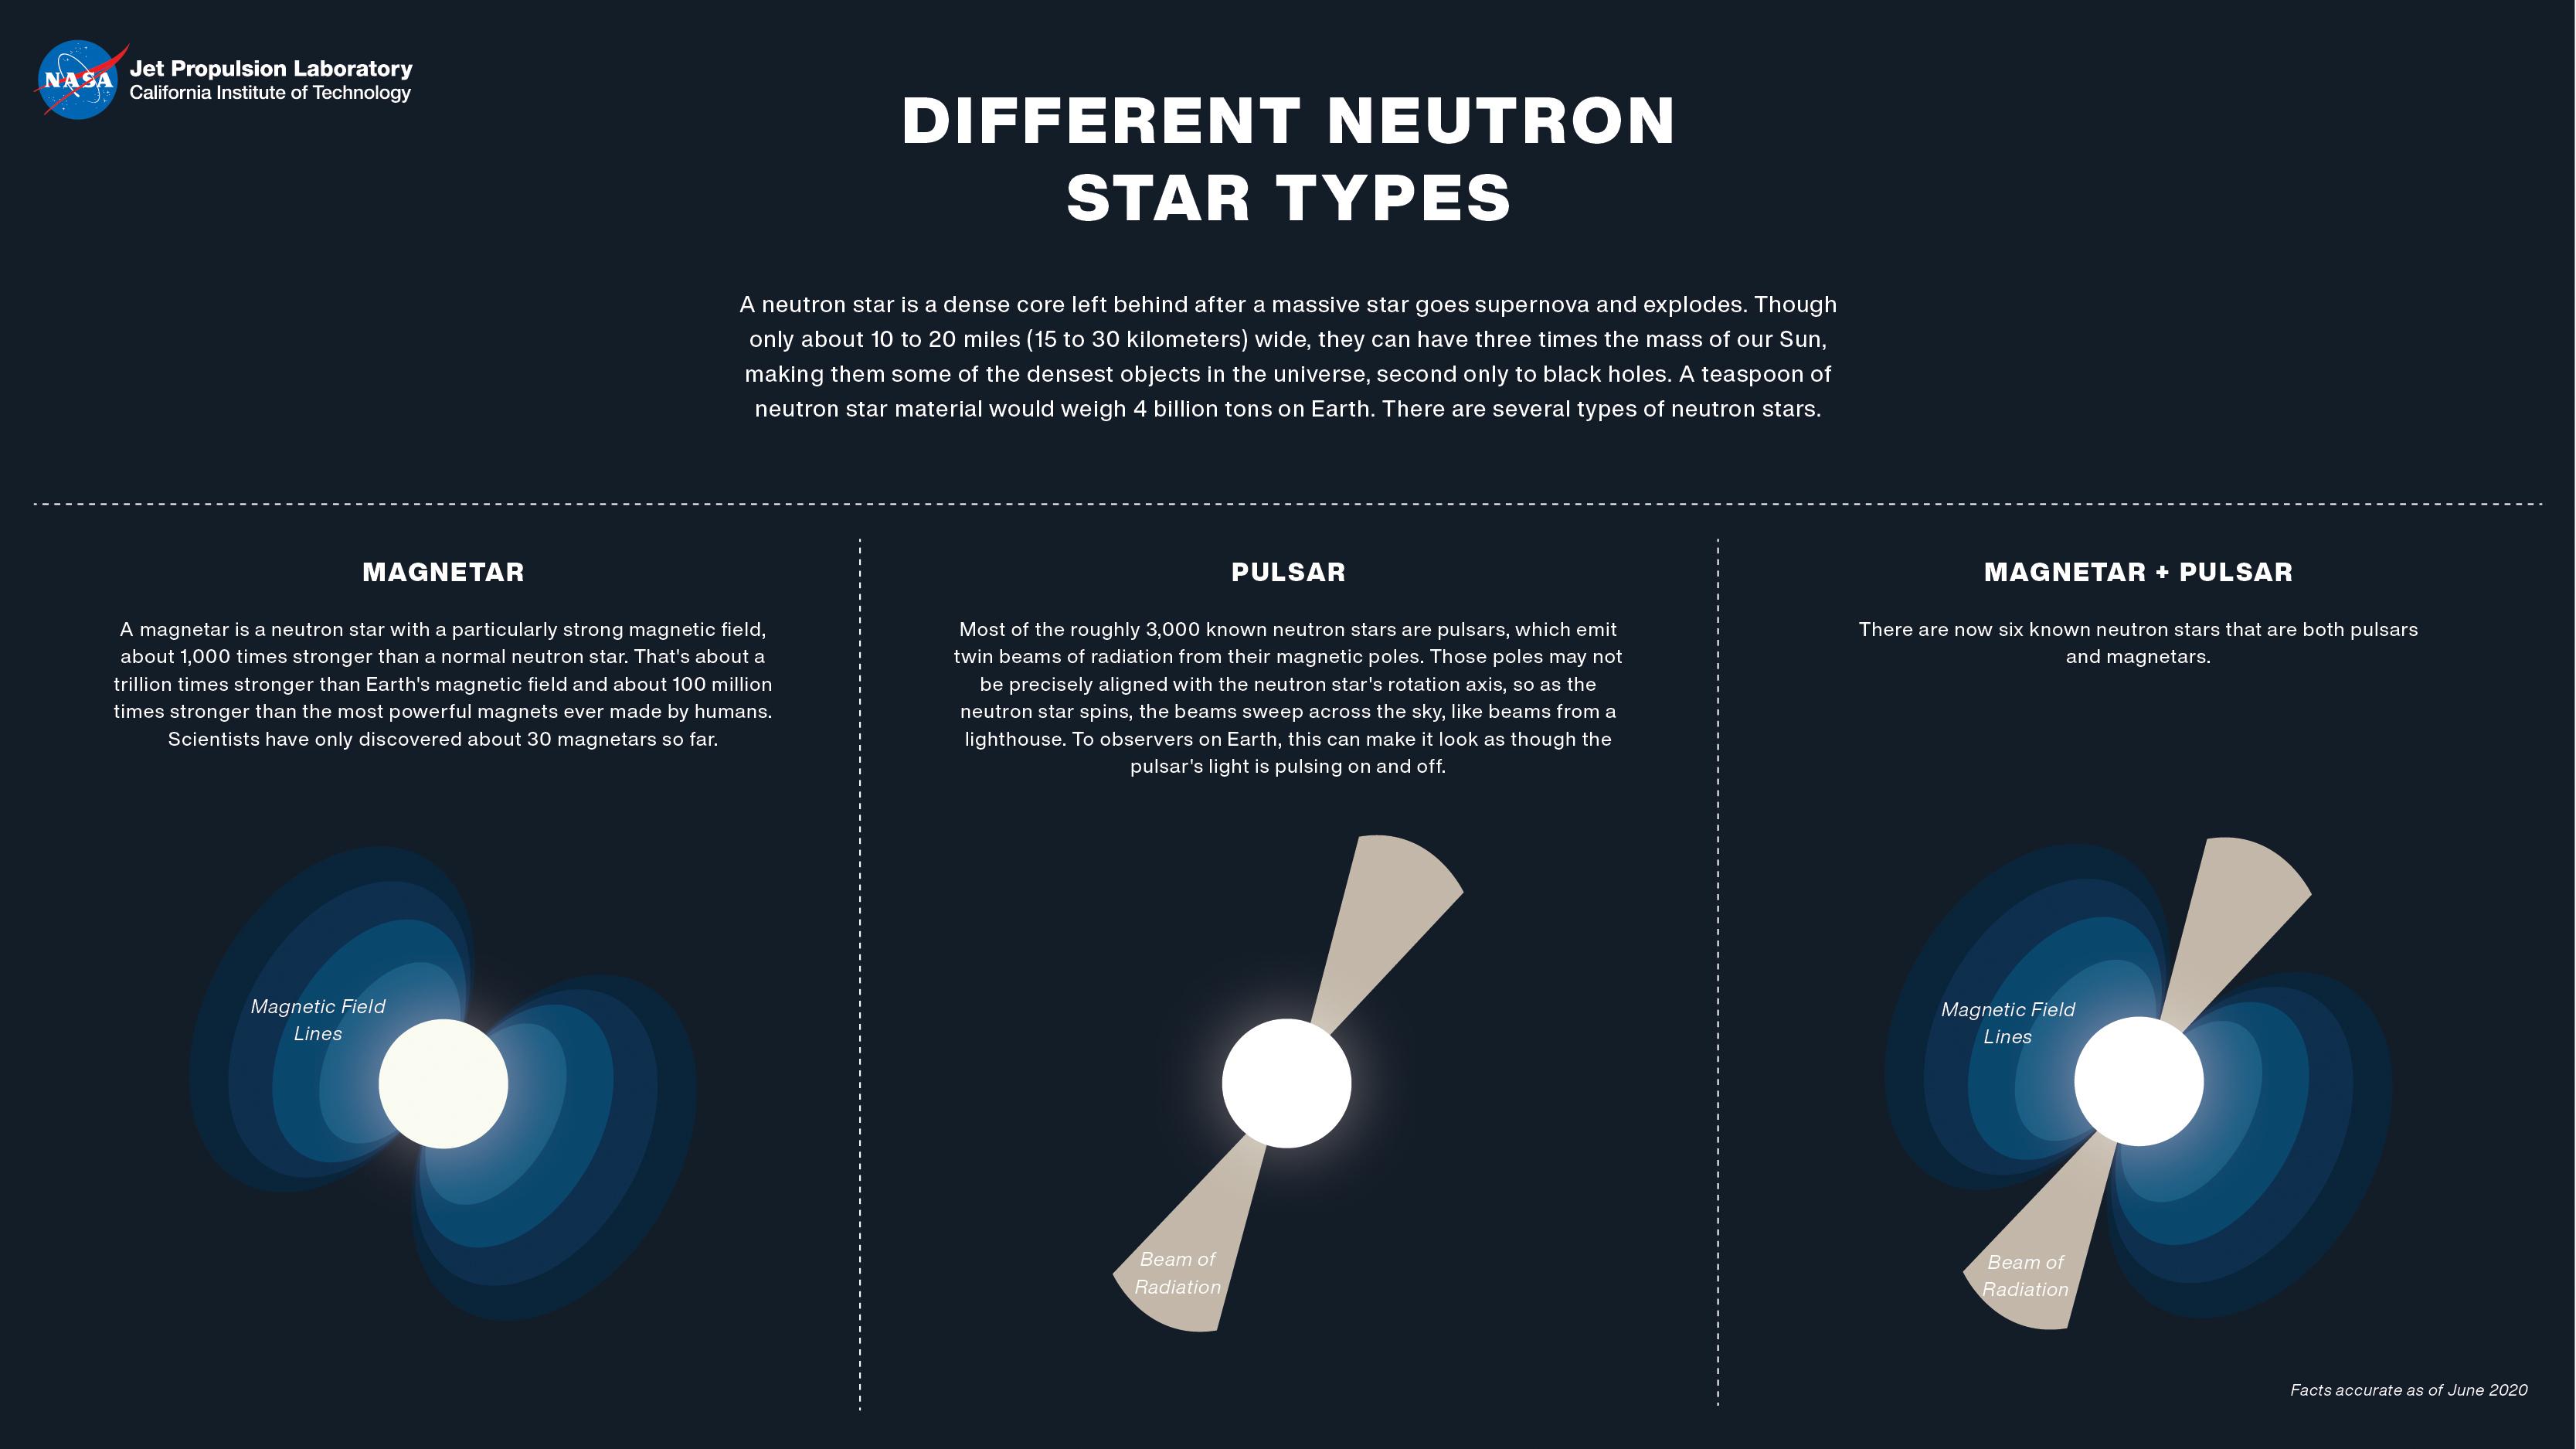 Illustration of different neutron star types and their properties